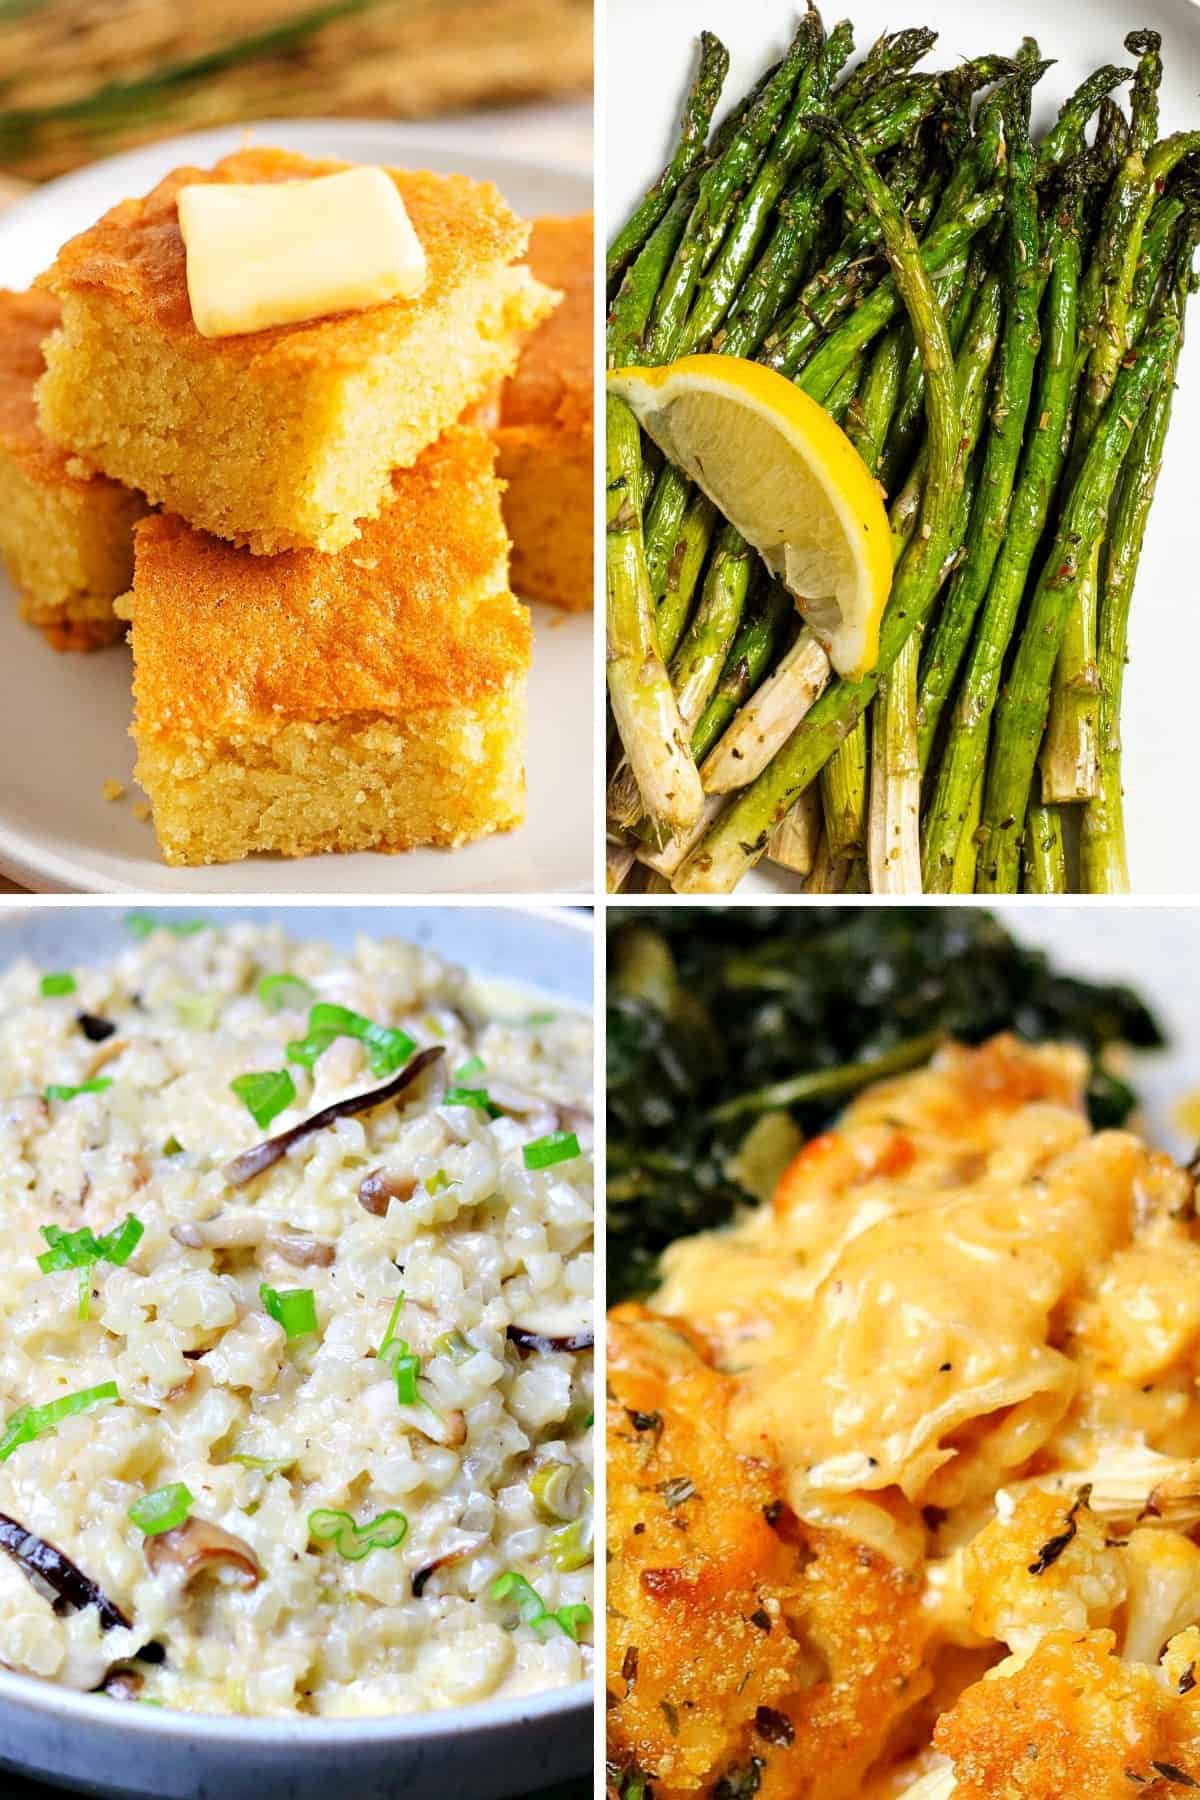 keto side dishes for chicken like keto cornbread, air fryer asparagus, keto Mac and cheese, and cauliflower rice risotto